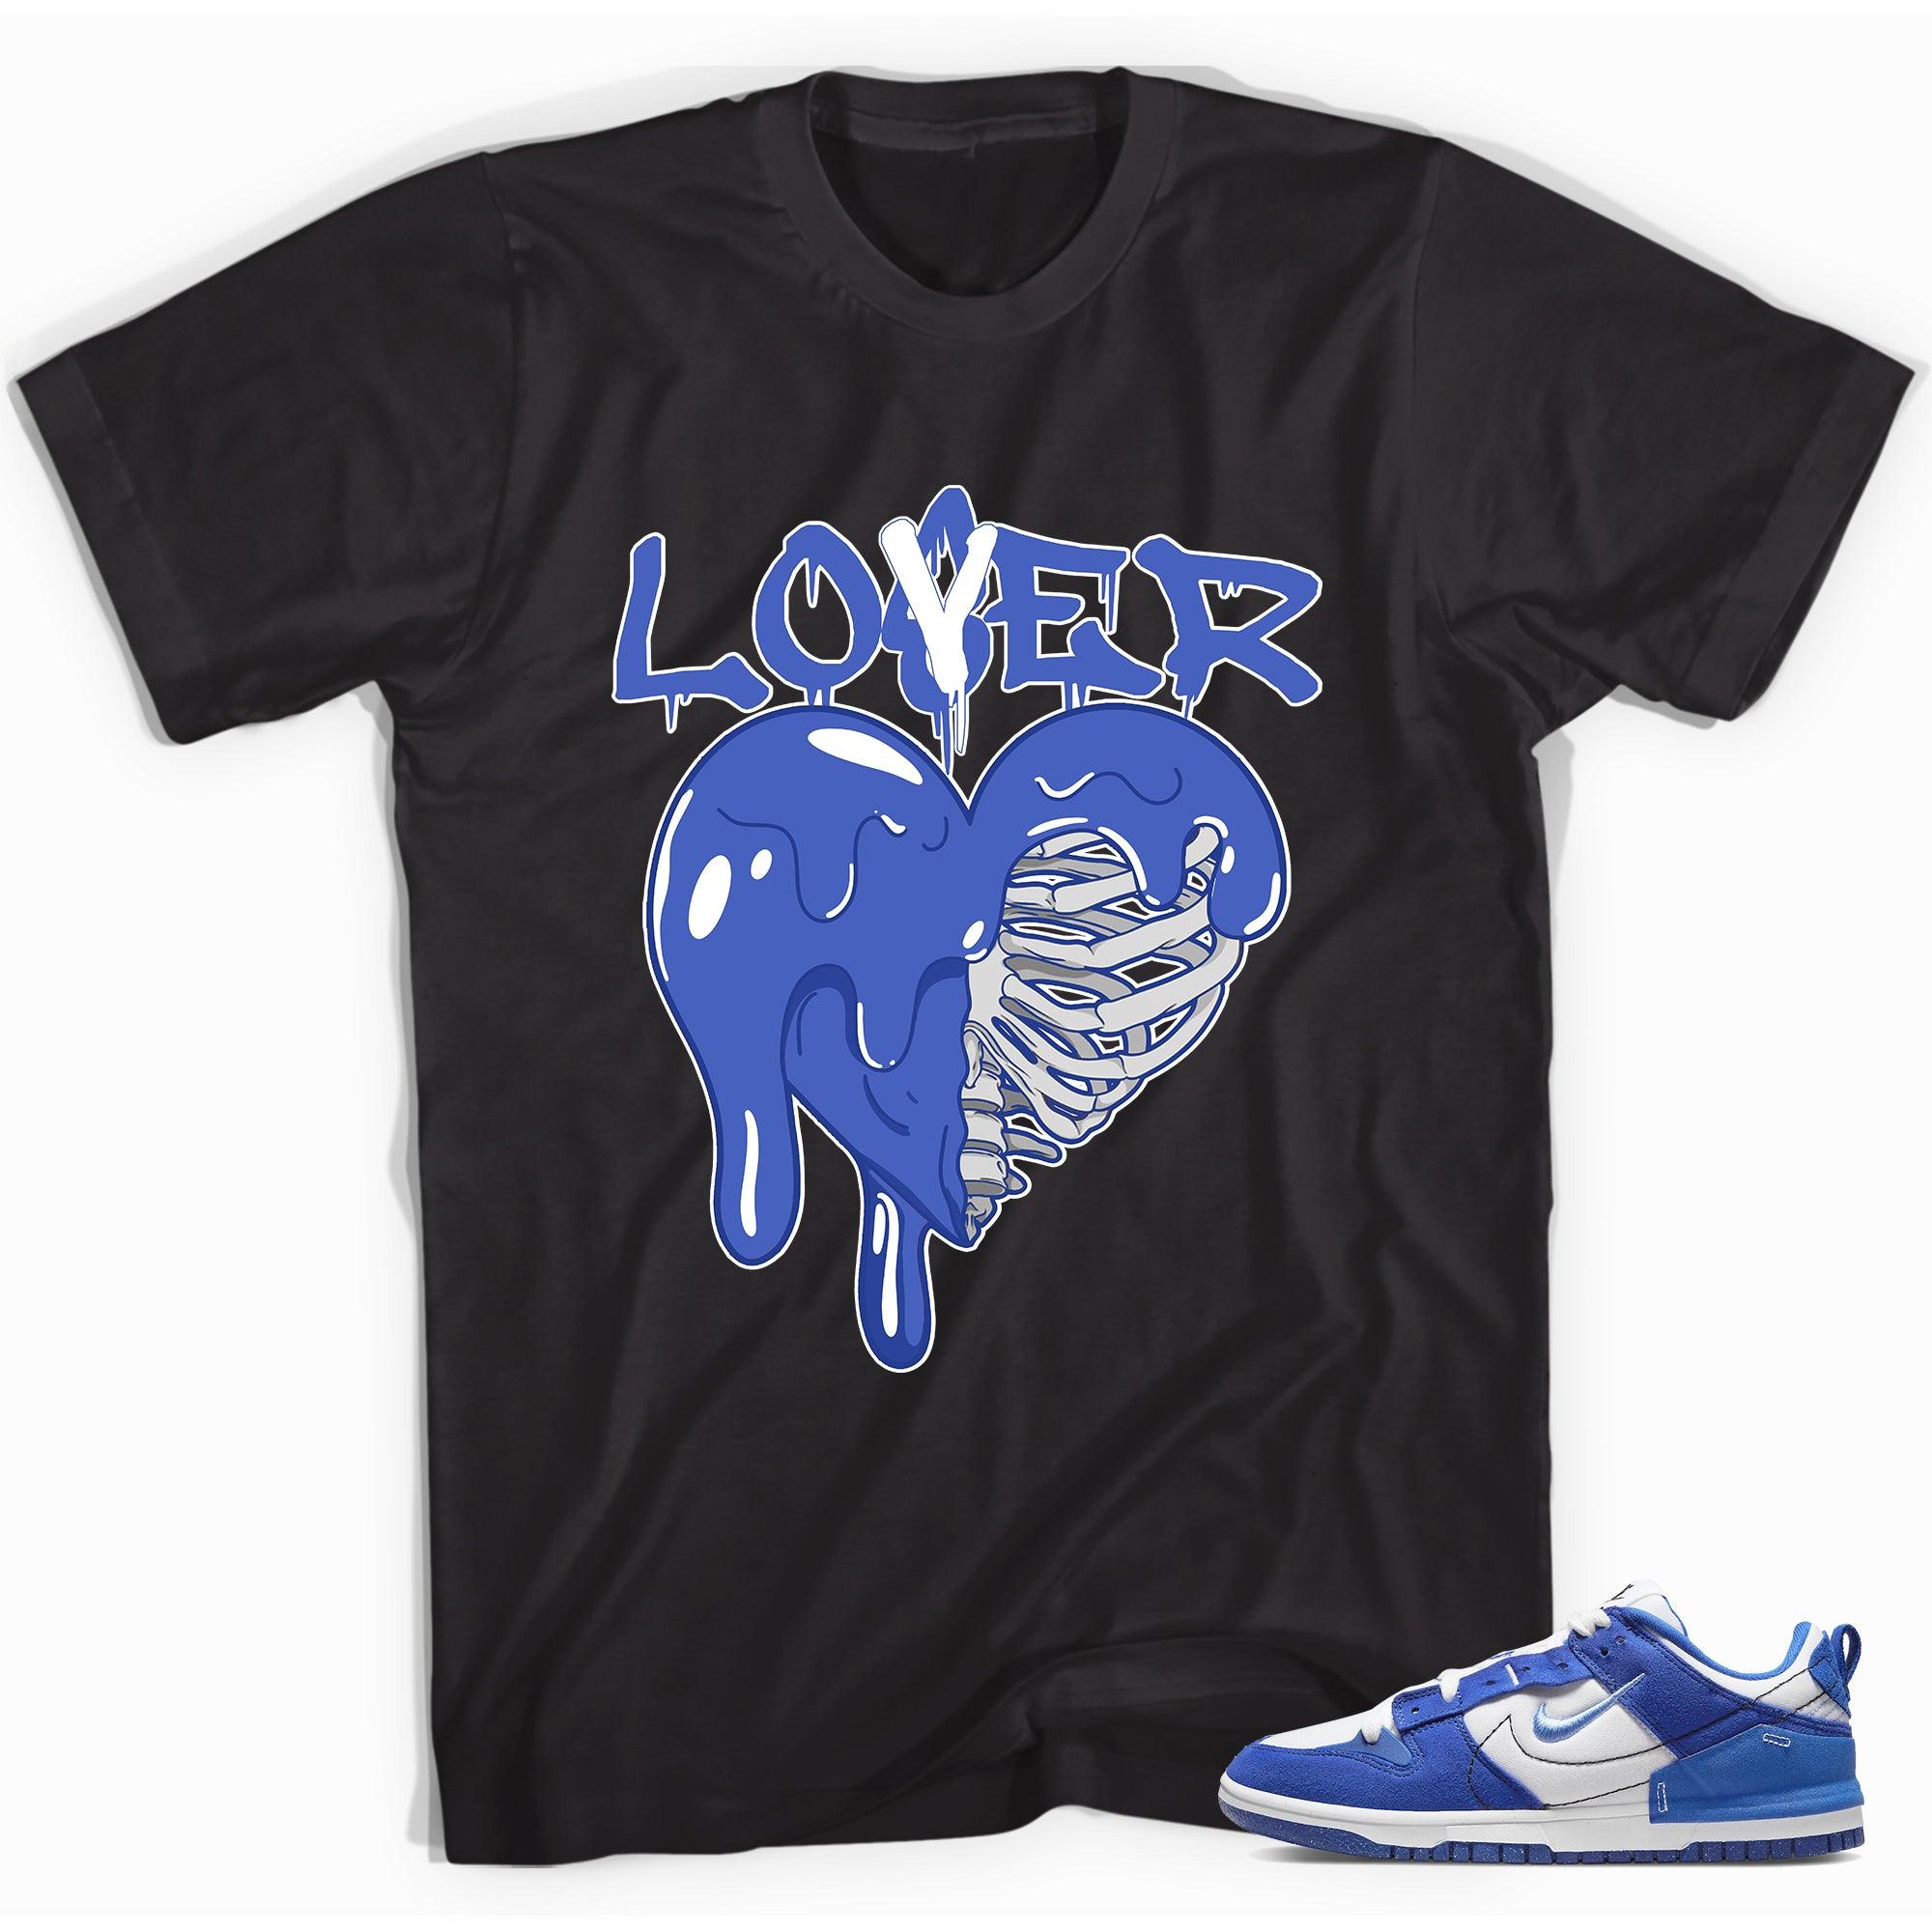 Cool Black graphic tee with “ Lover Loser ” print, that perfectly matches Nike Dunk Disrupt 2 Hyper Royal sneakers 